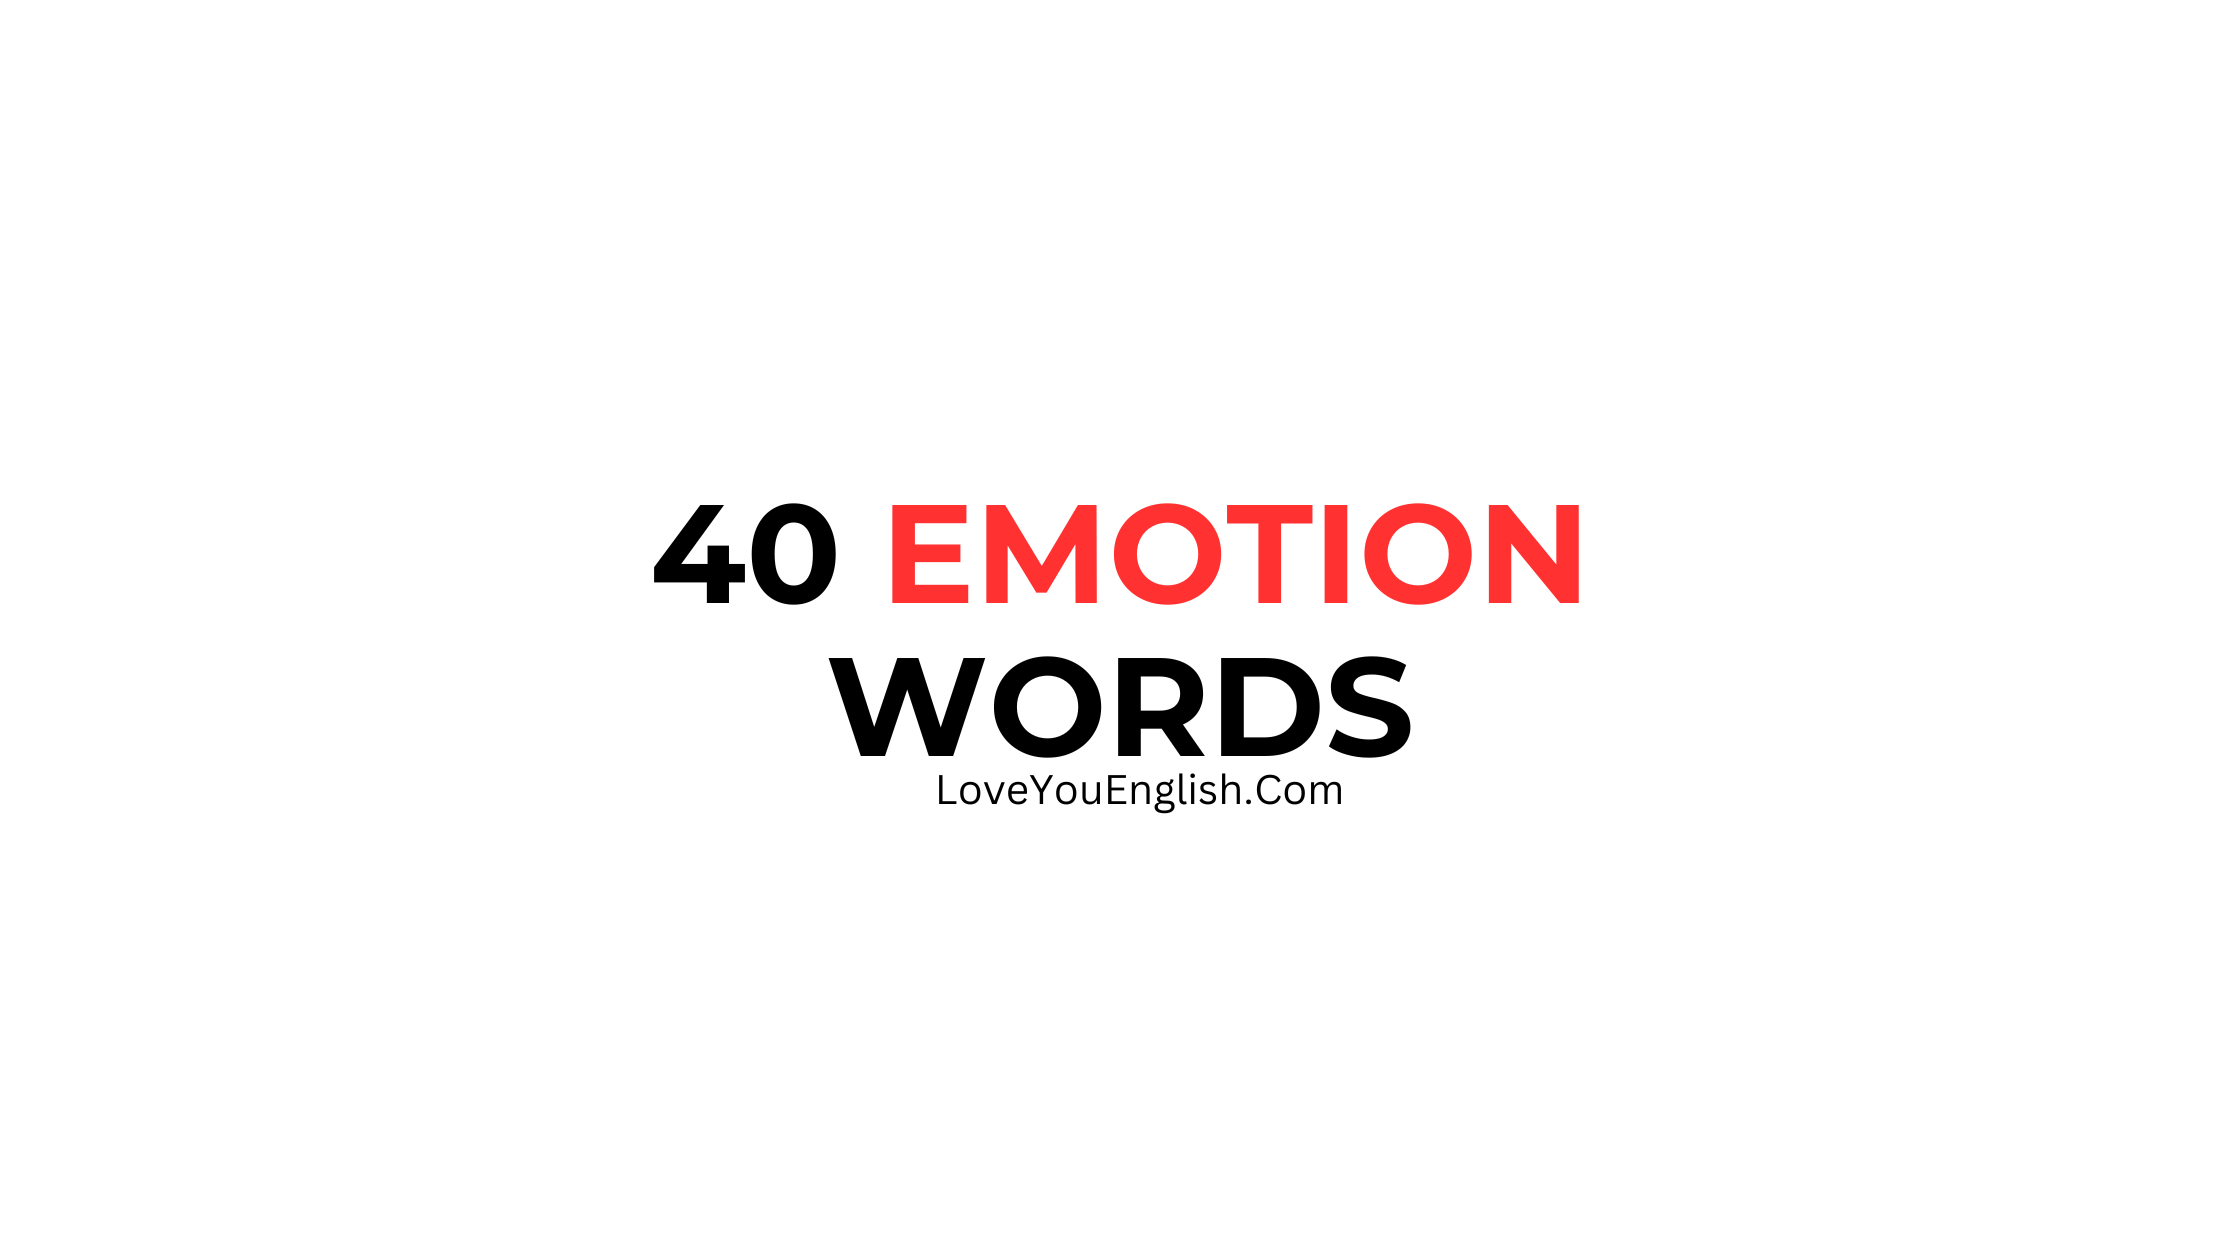 40 emotion words in English